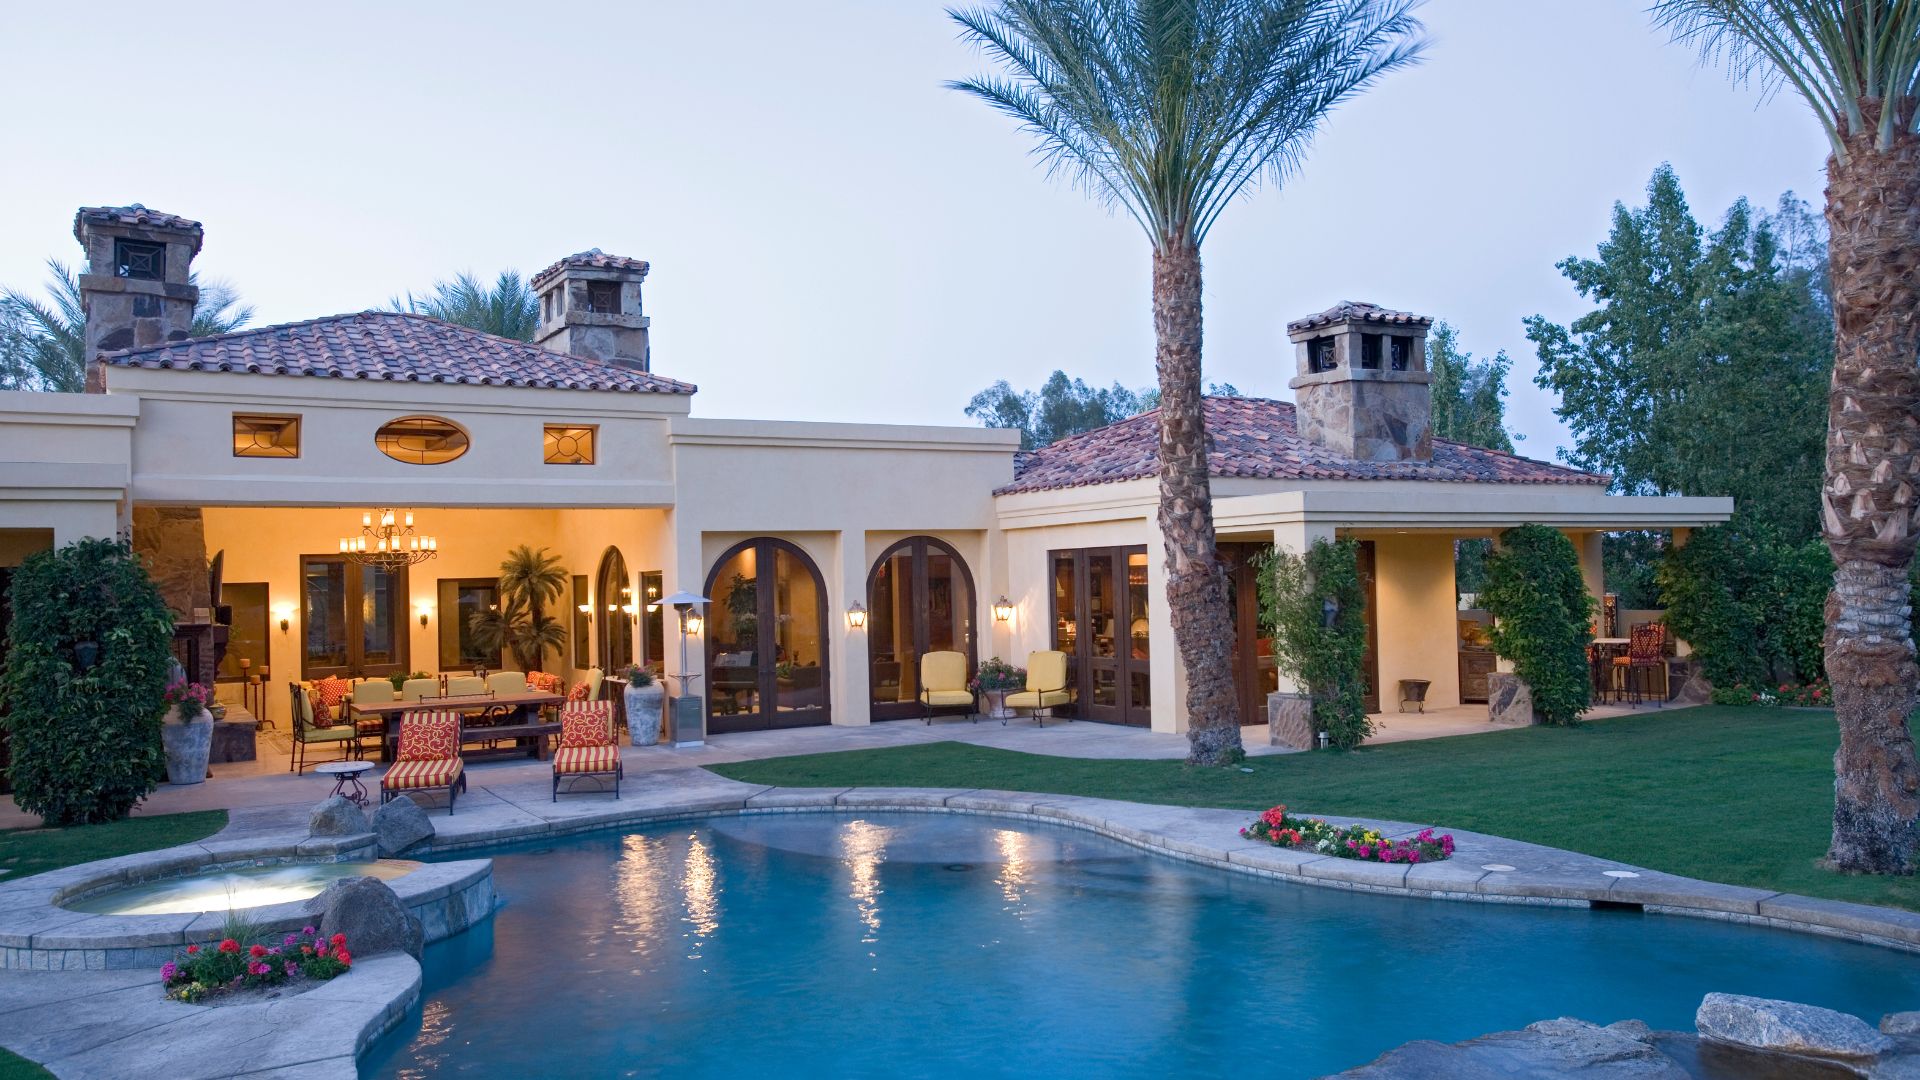 A beautiful luxury home surrounded by palm trees and featuring a pool.